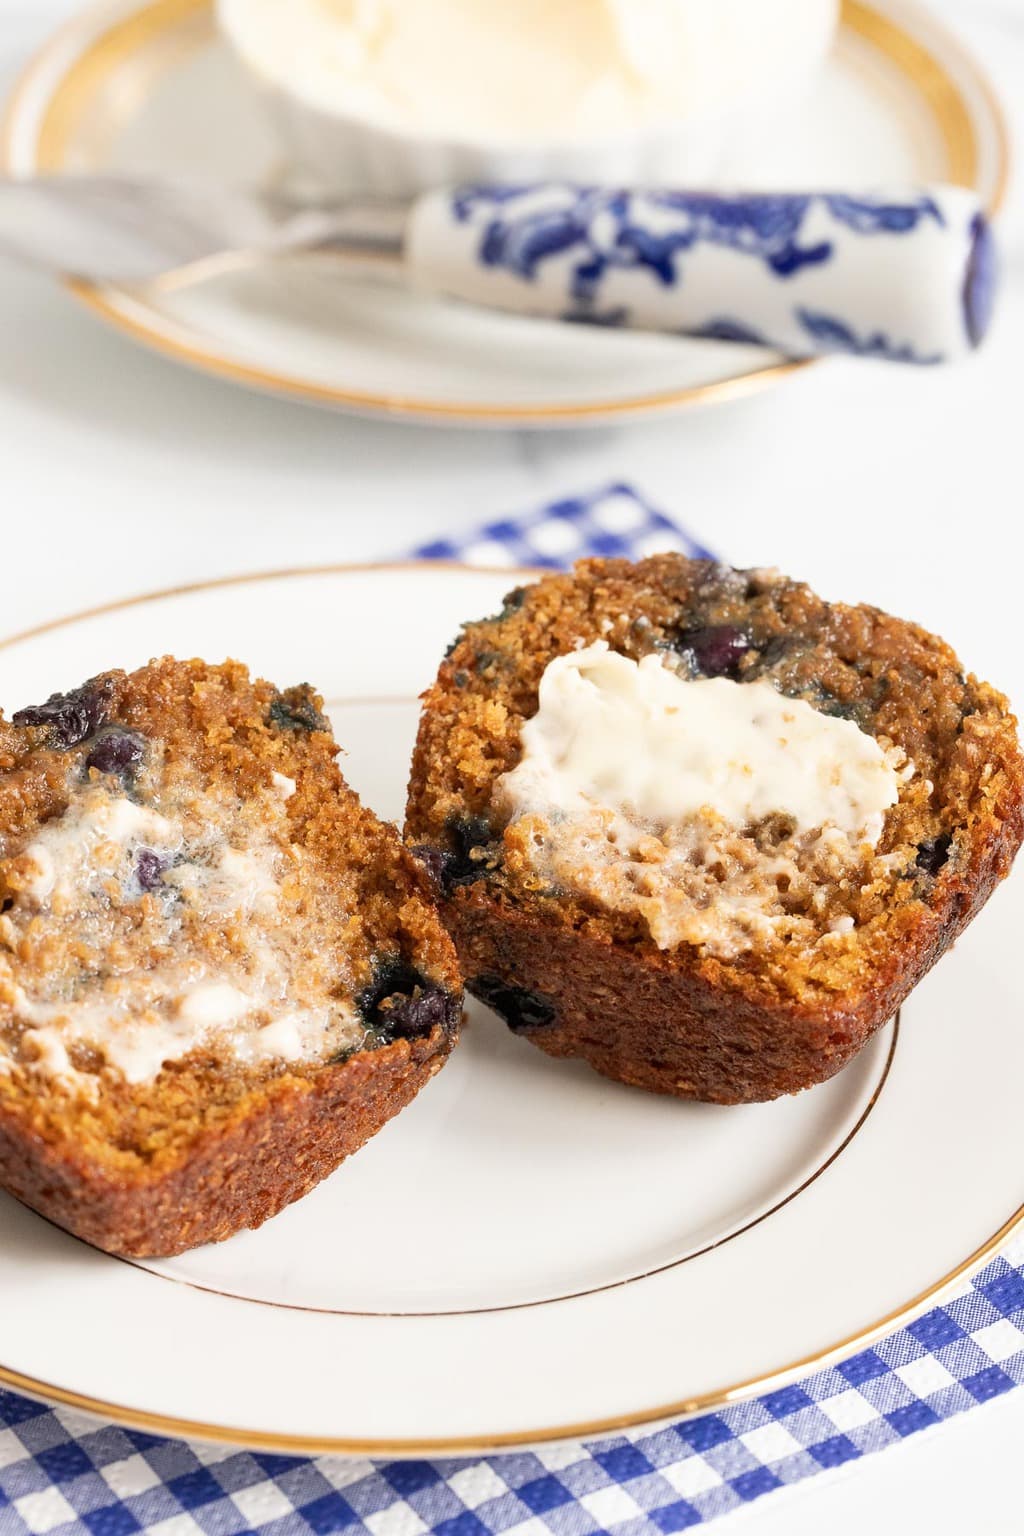 Vertical closeup photo of a Honey-Glazed Blueberry Bran Muffin opened and spread with melting butter.